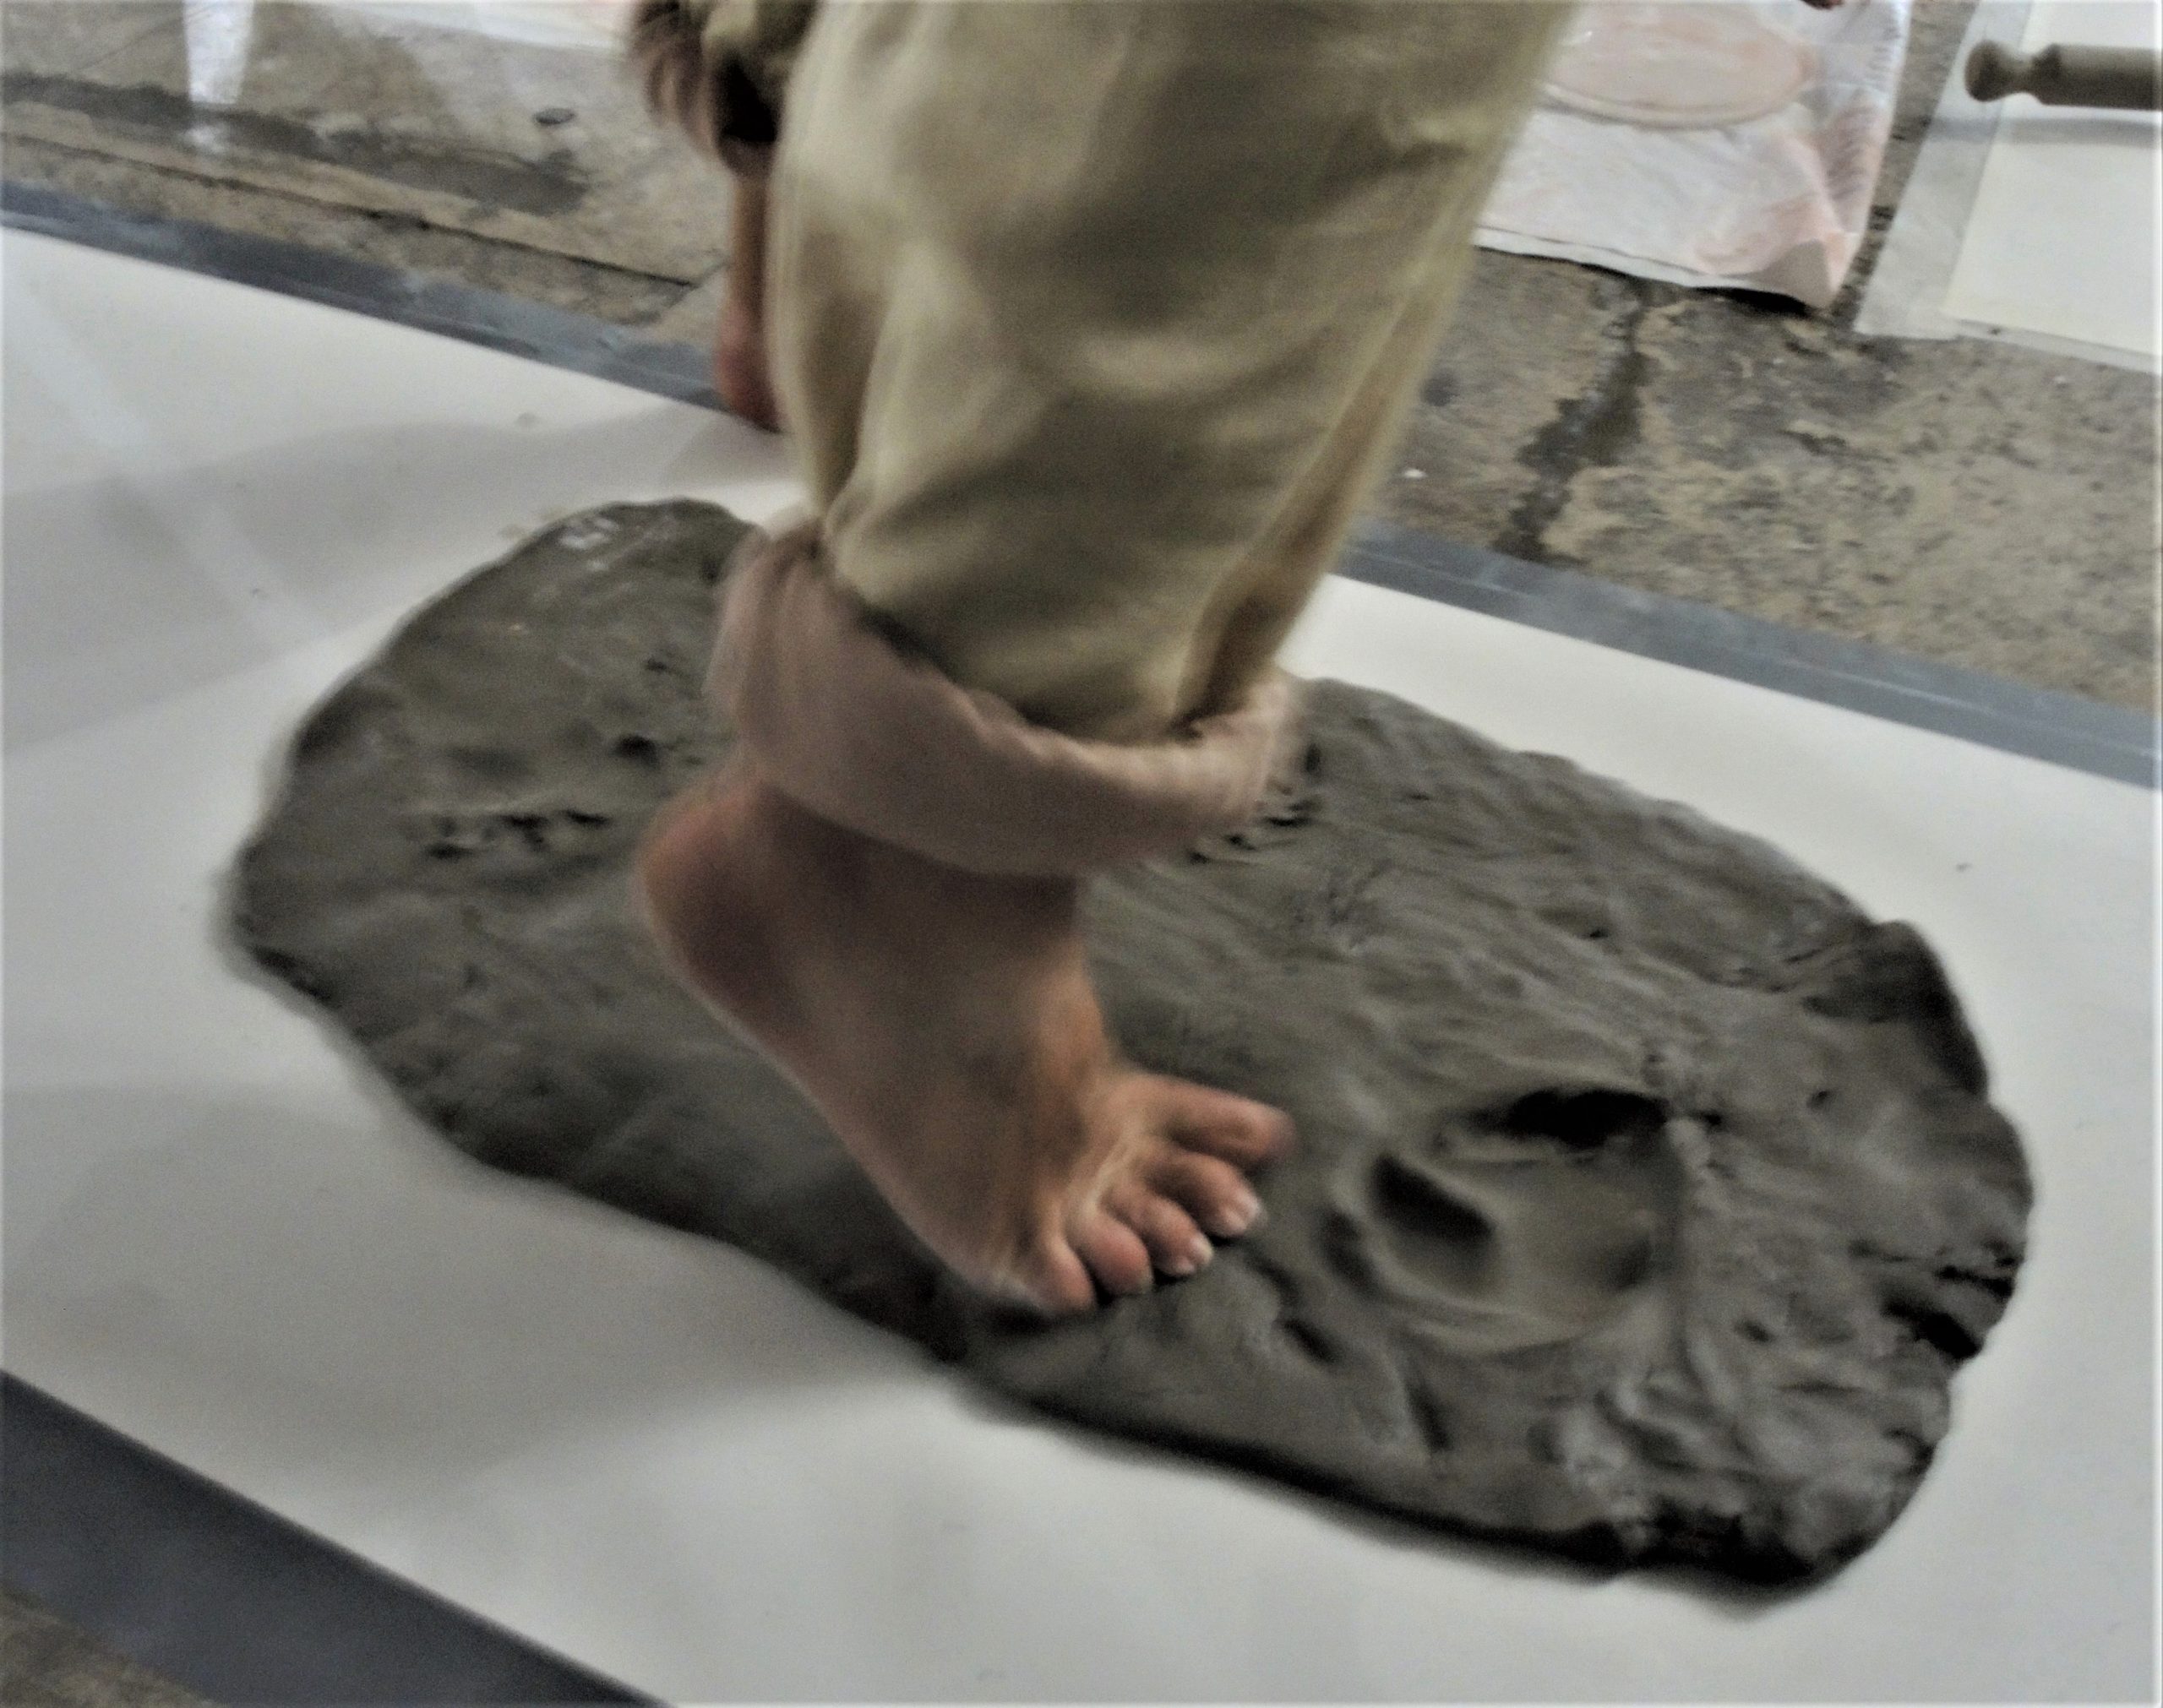 A participant dancer has their socks off, and their barefoot is pushing into a slab of grey clay